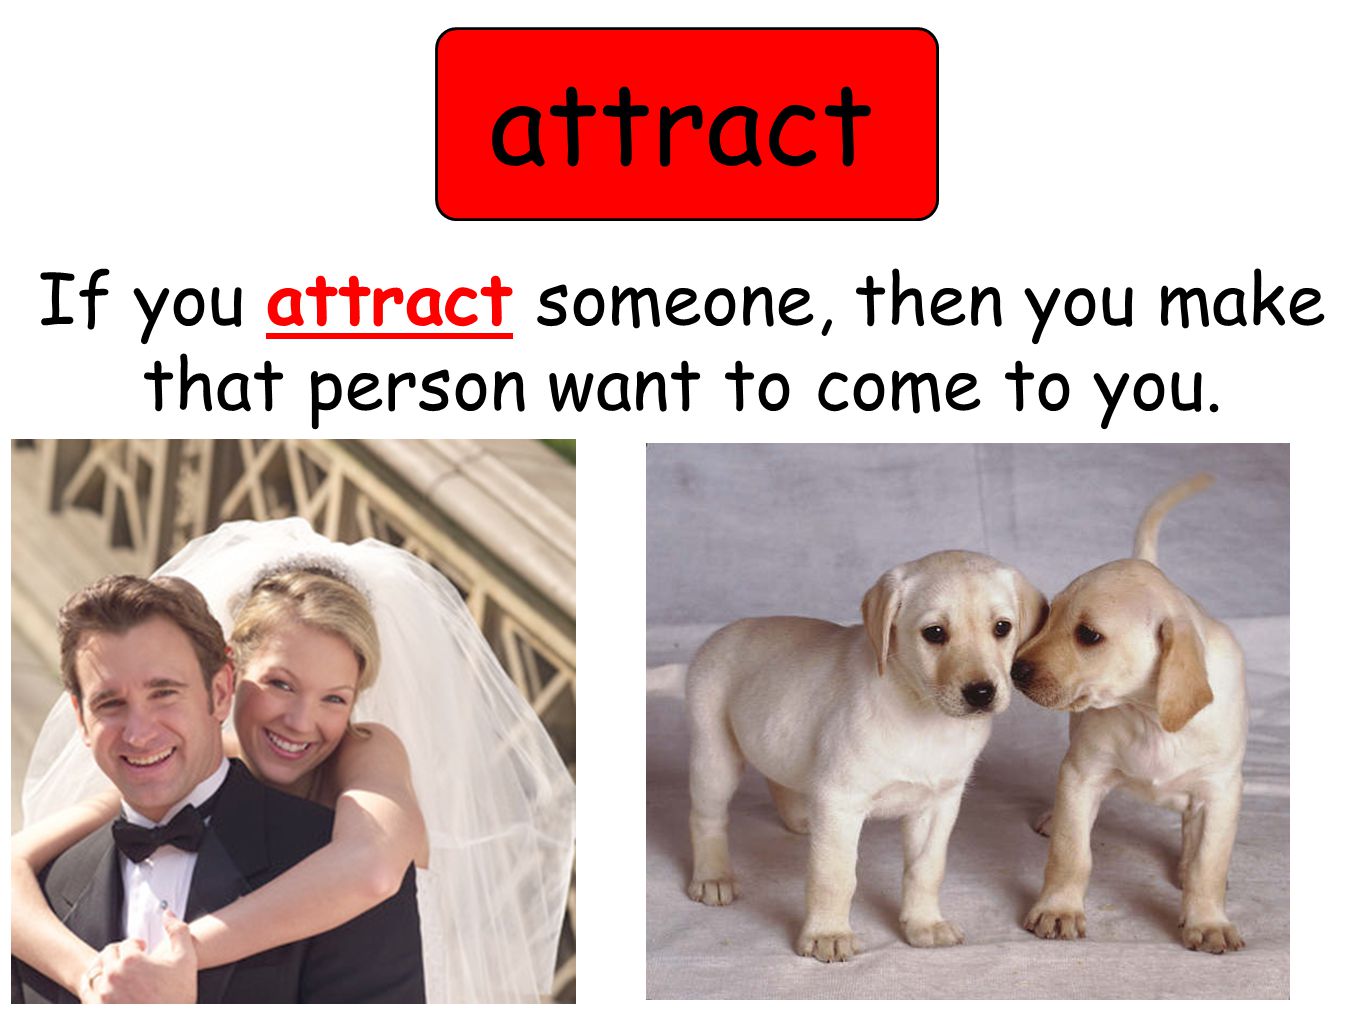 attract If you attract someone, then you make that person want to come to you.